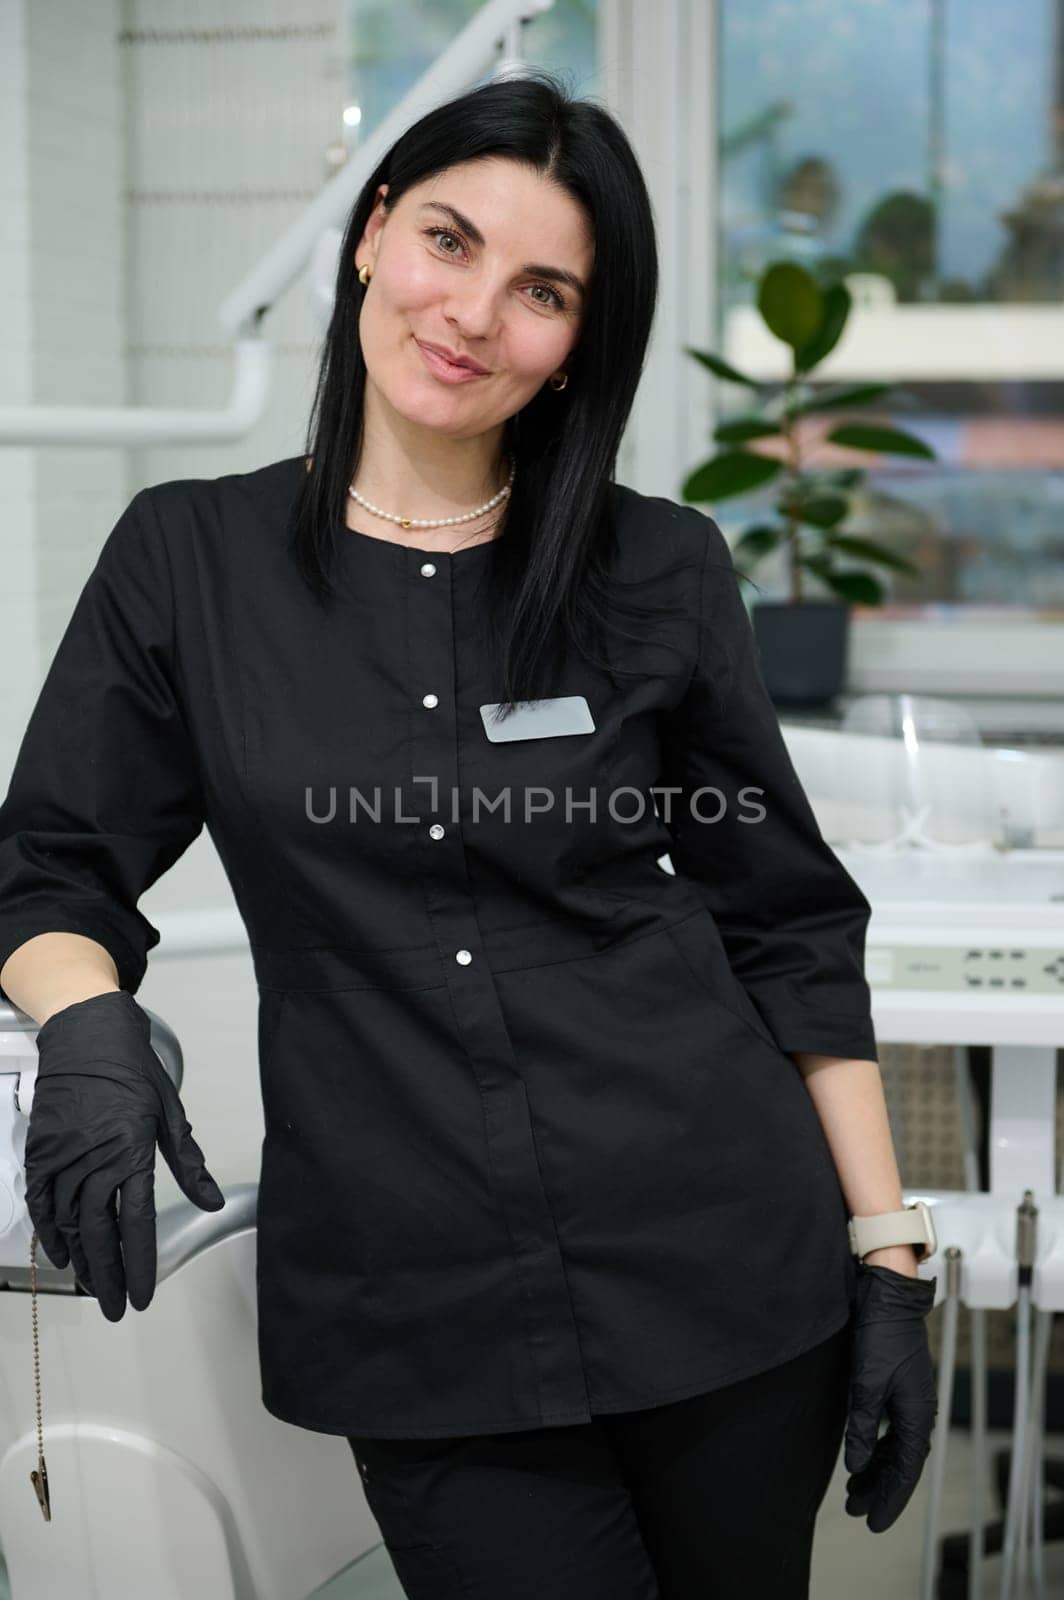 Confident portrait of a beautiful experienced woman doctor, orthodontist, dental hygienist wearing stylish black medical unifrom and gloves, smiles looking at camera, standing in newest dentist office